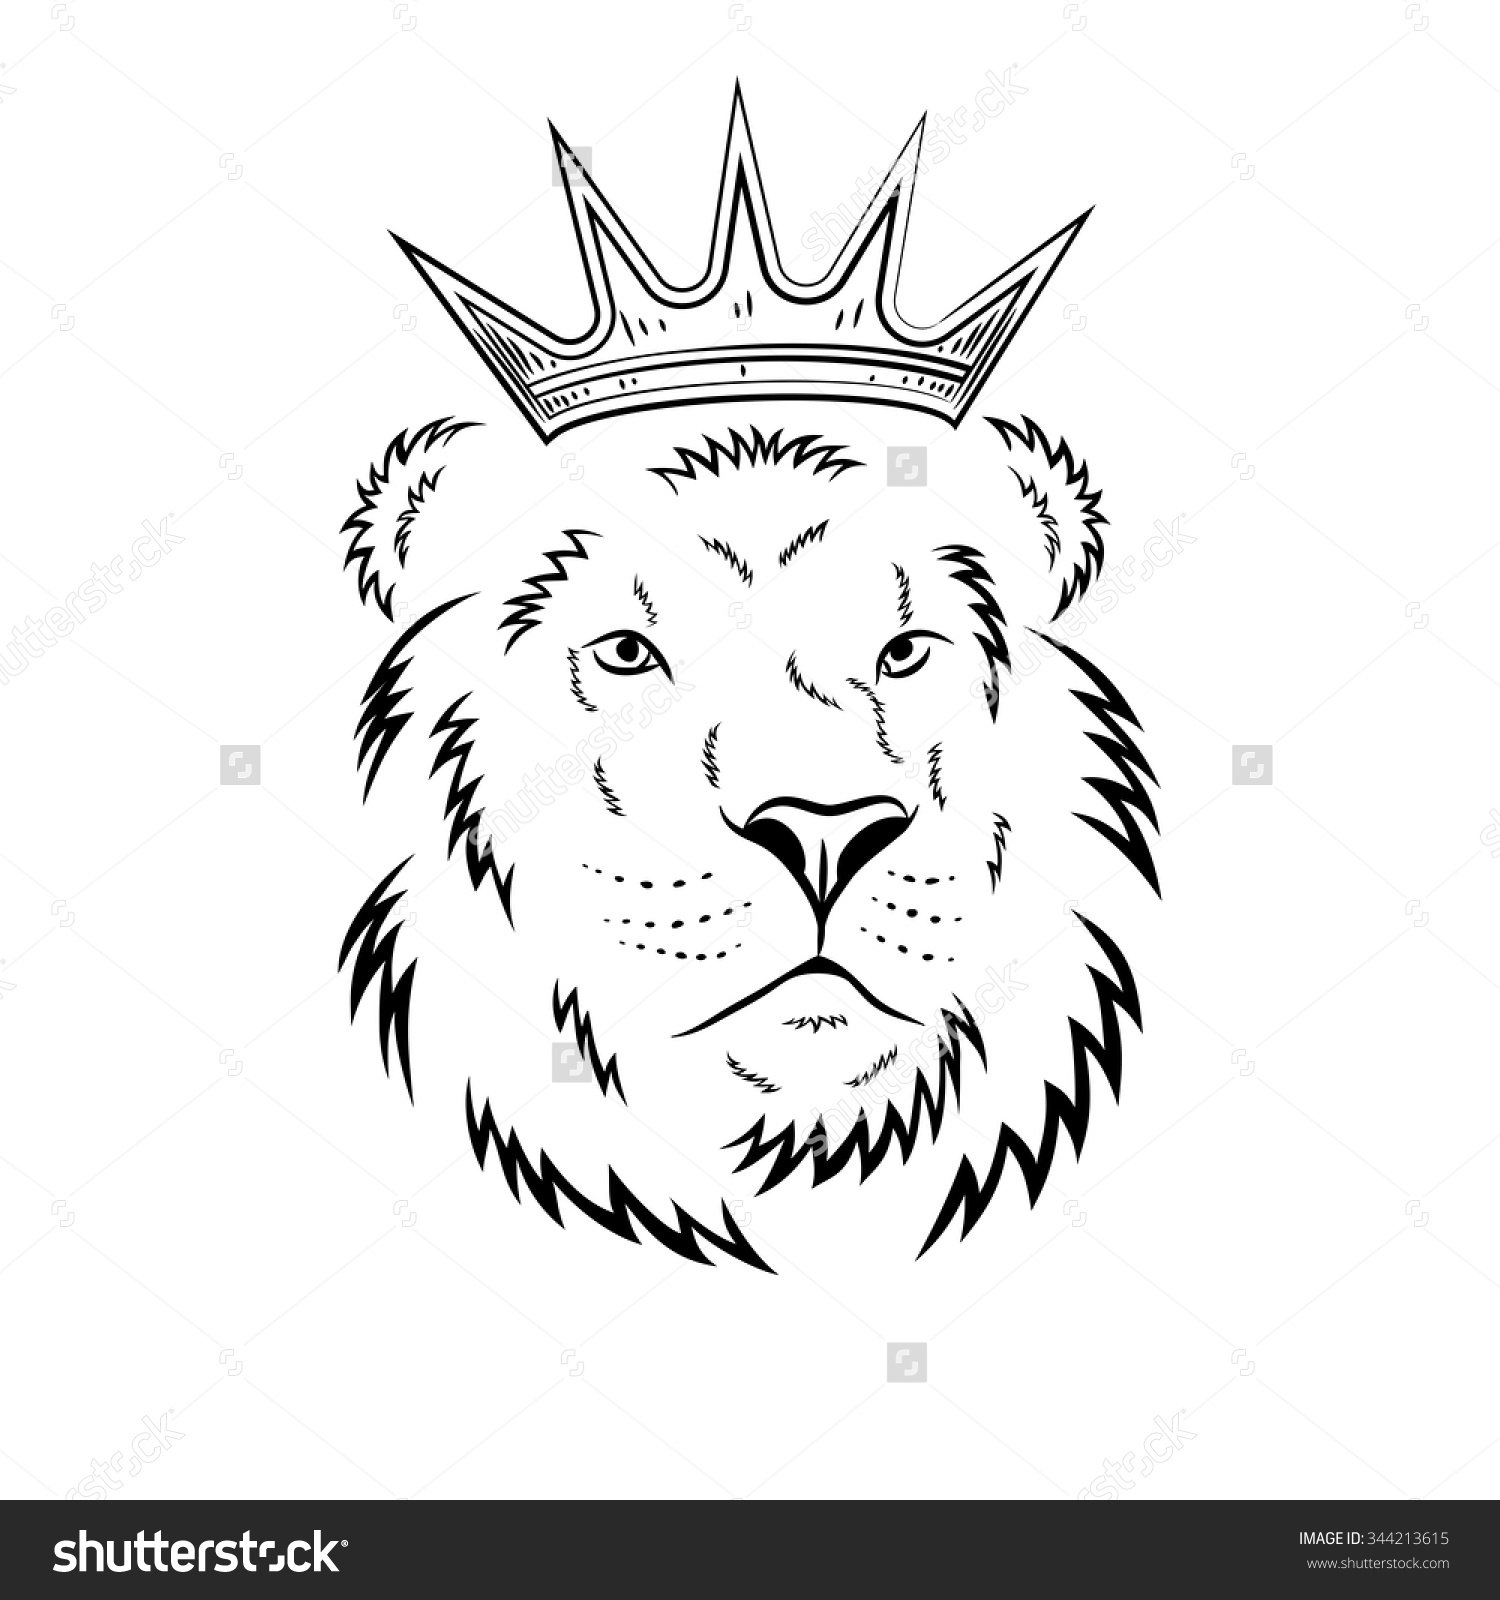 1500x1600 Lion With Crown Drawing Lion Head Crown Vector Illustration Stock...